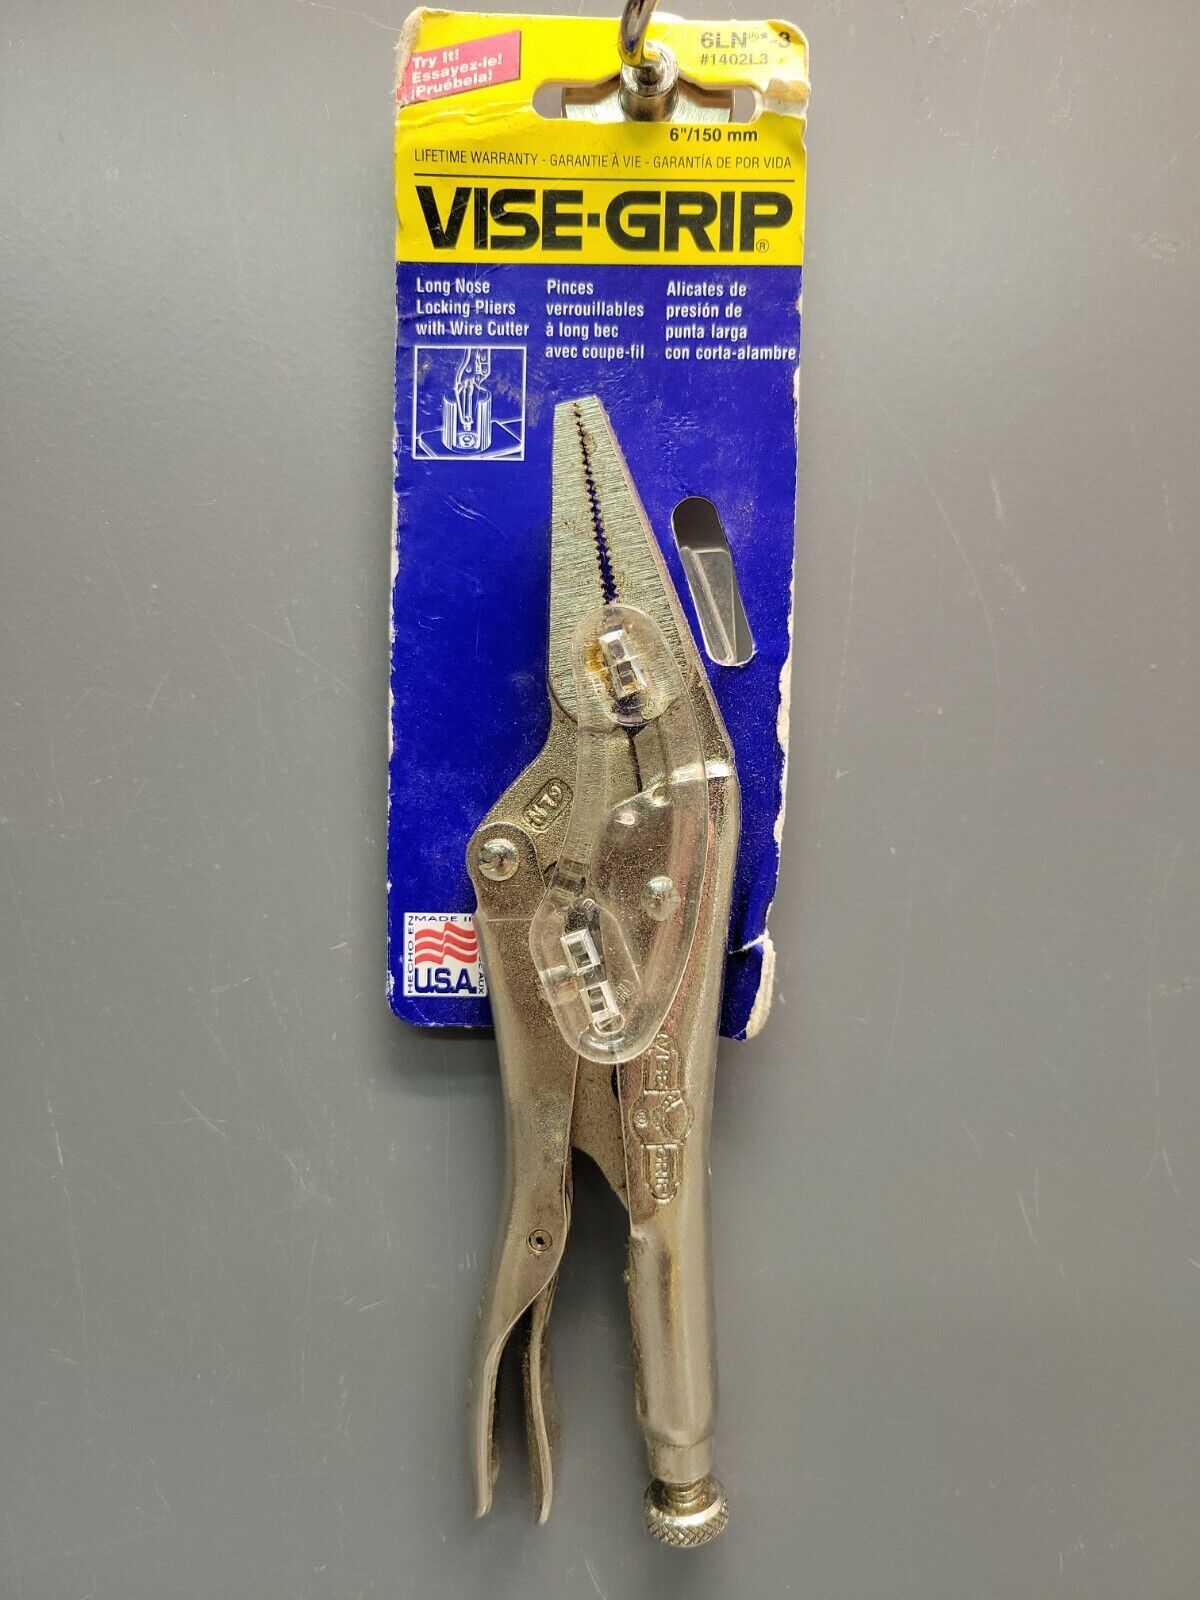 6LN Vise-Grip Long Nose Locking Pliers USA 1994/1997 New Old Stock Made in USA  